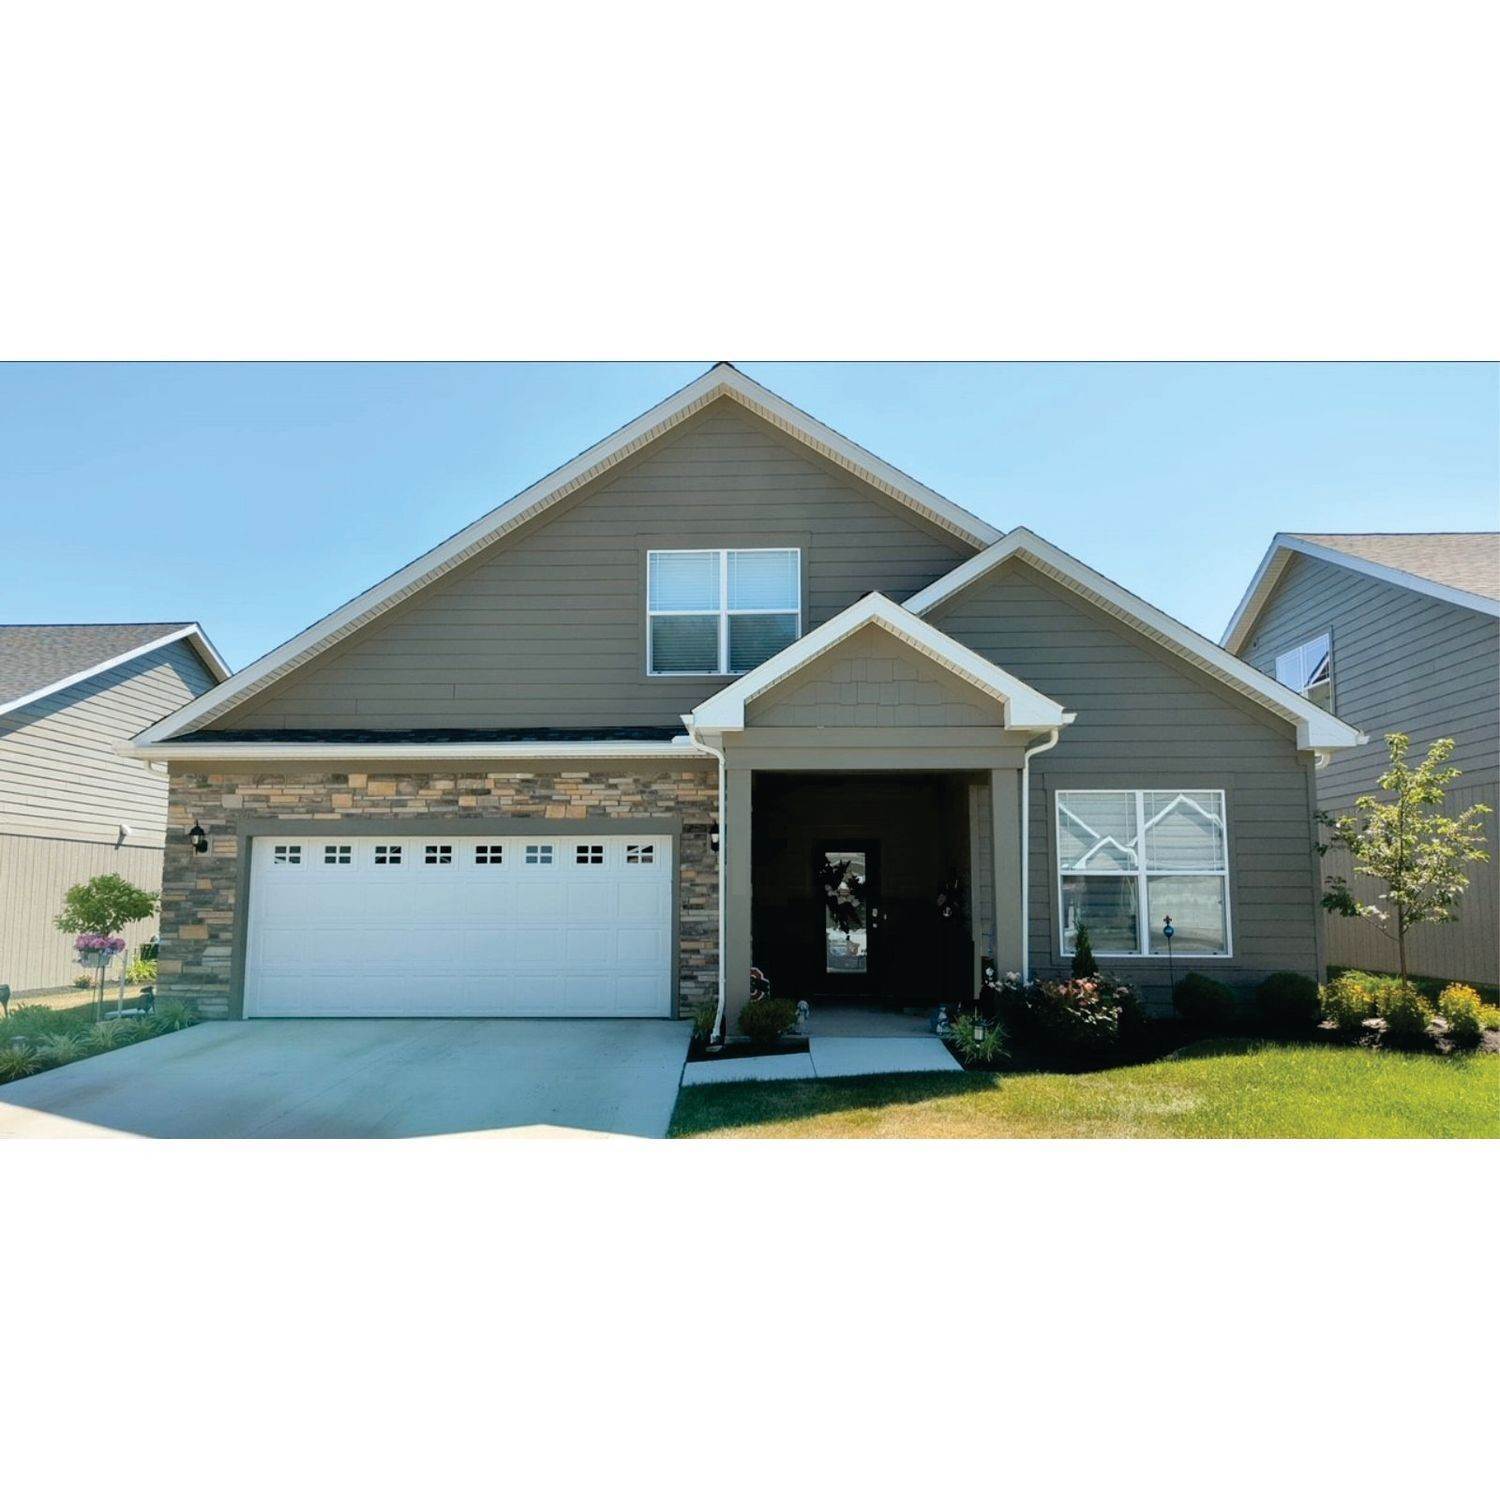 24. 4079 Coventry Circle, Huron, OH 44839에 The Courtyards at Plum Brook 건물